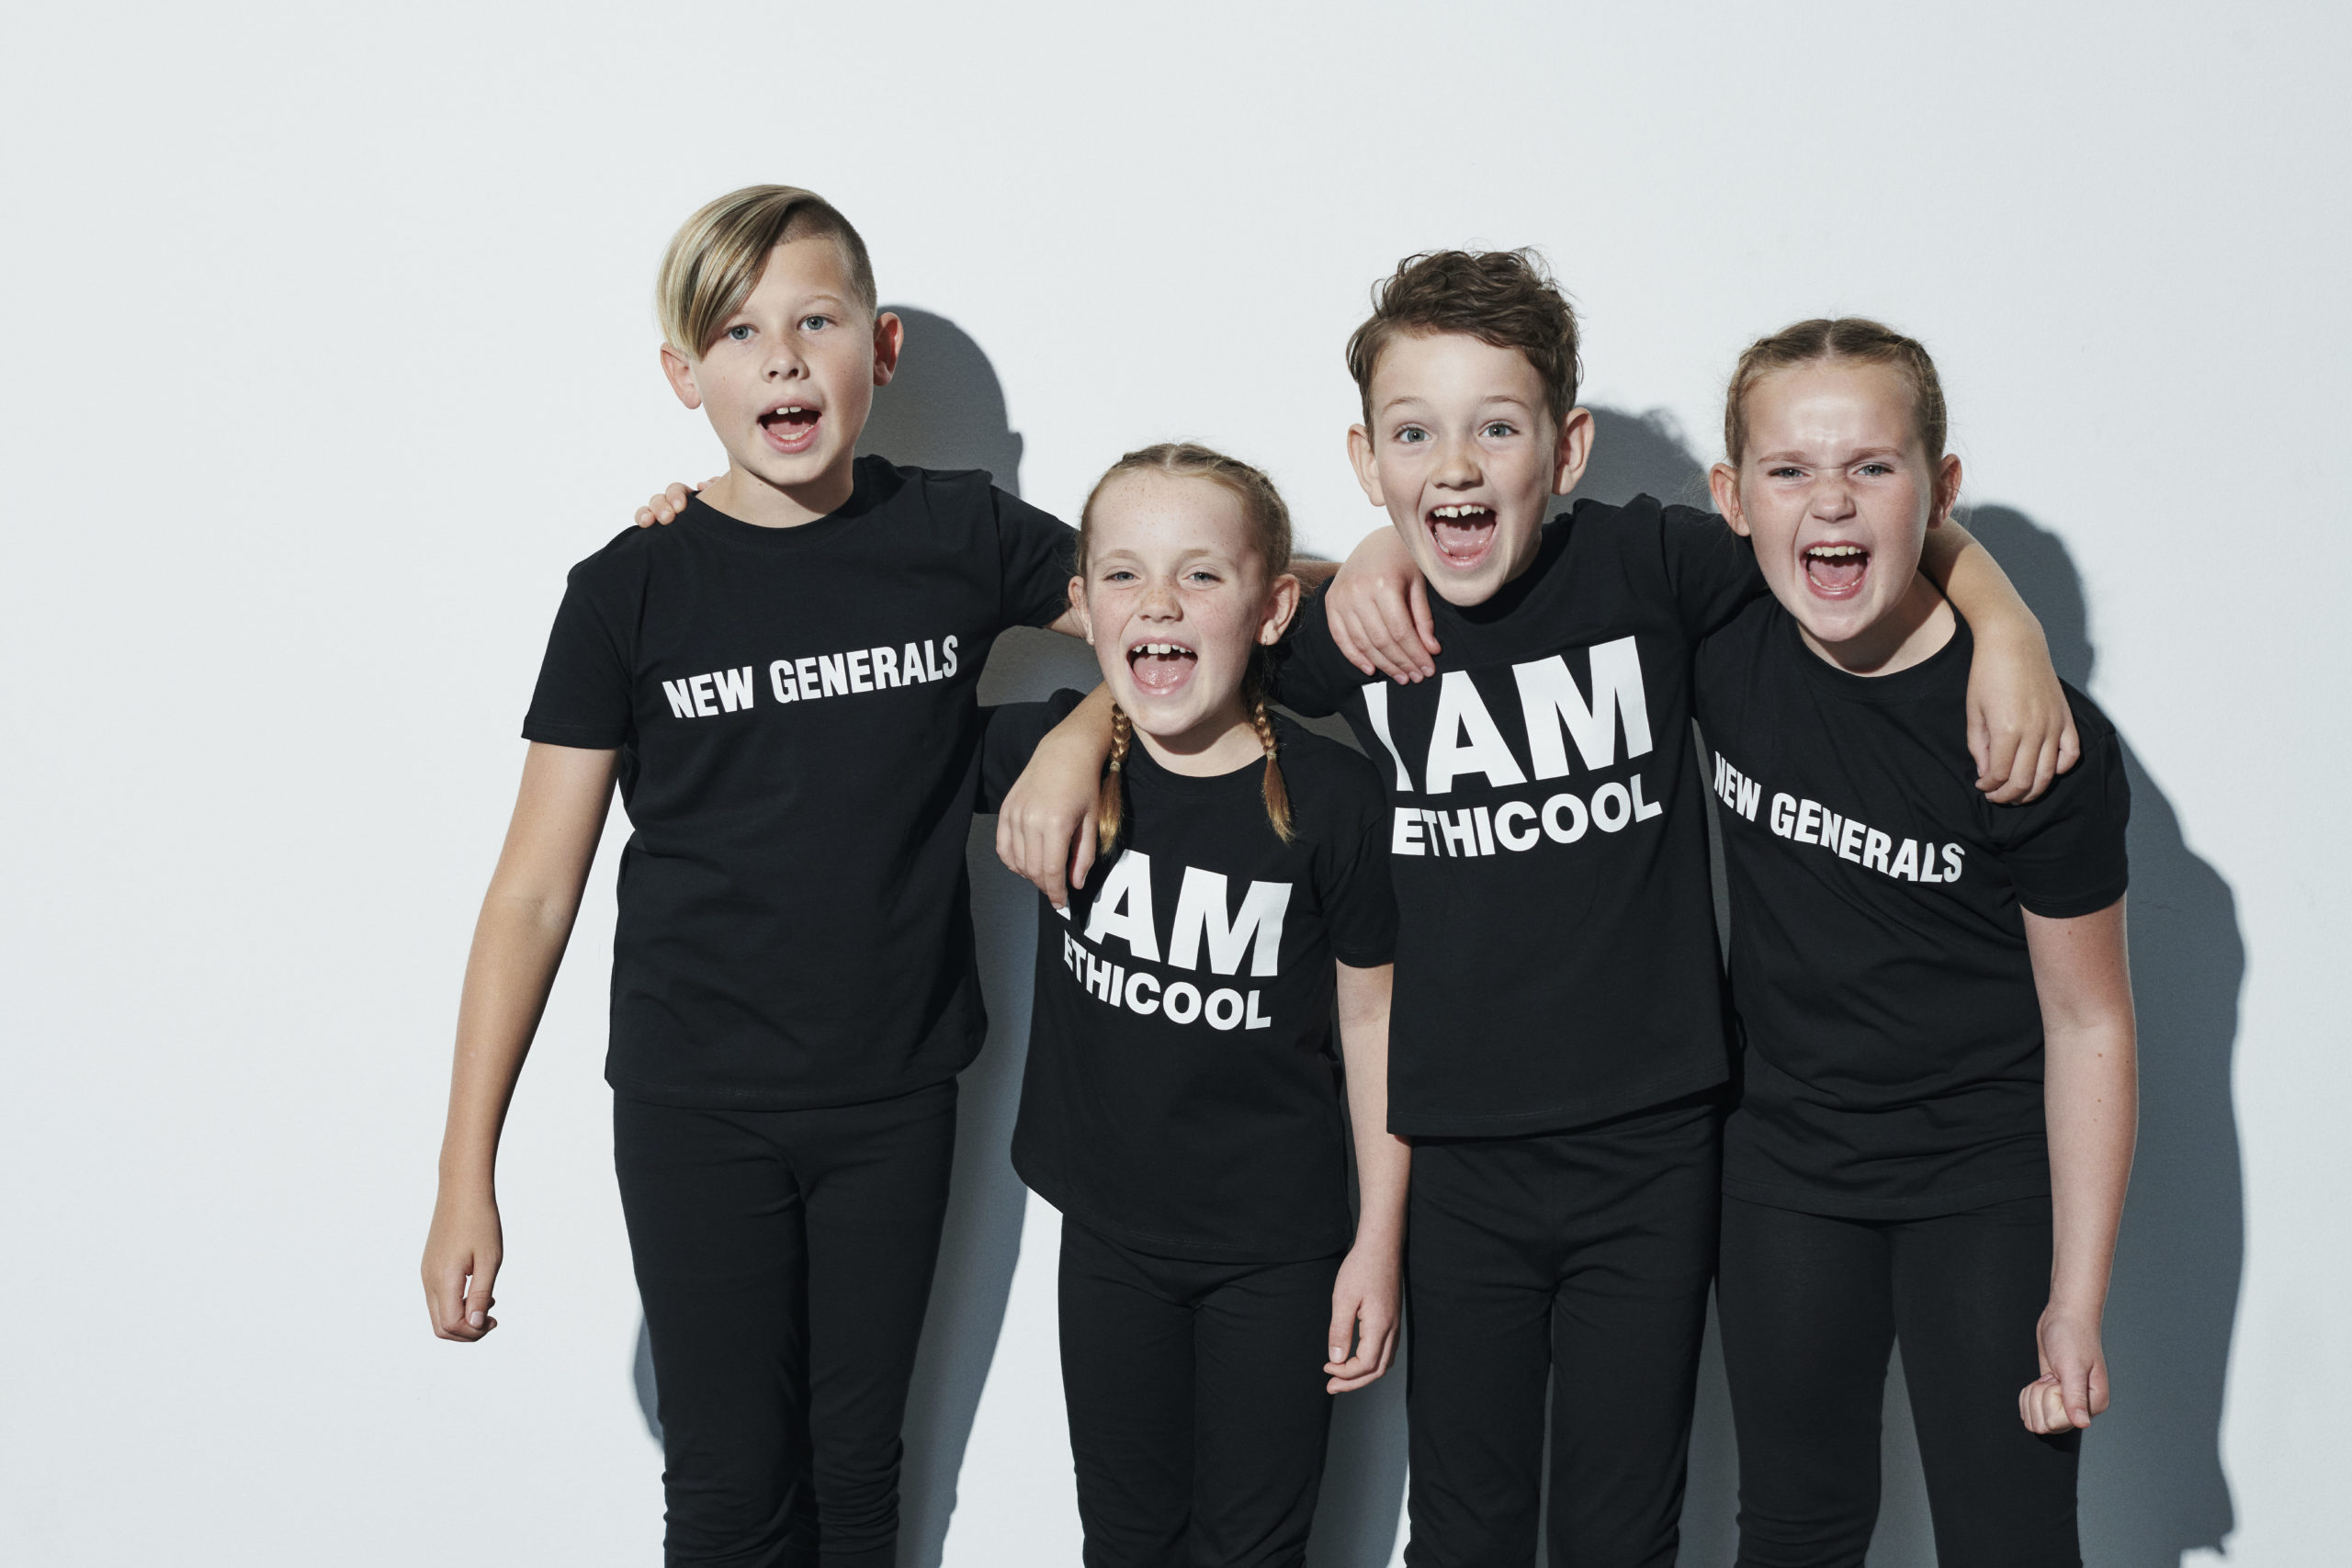 Relaunched this week New Generals ethical kids Scandi brand from Copenhagen